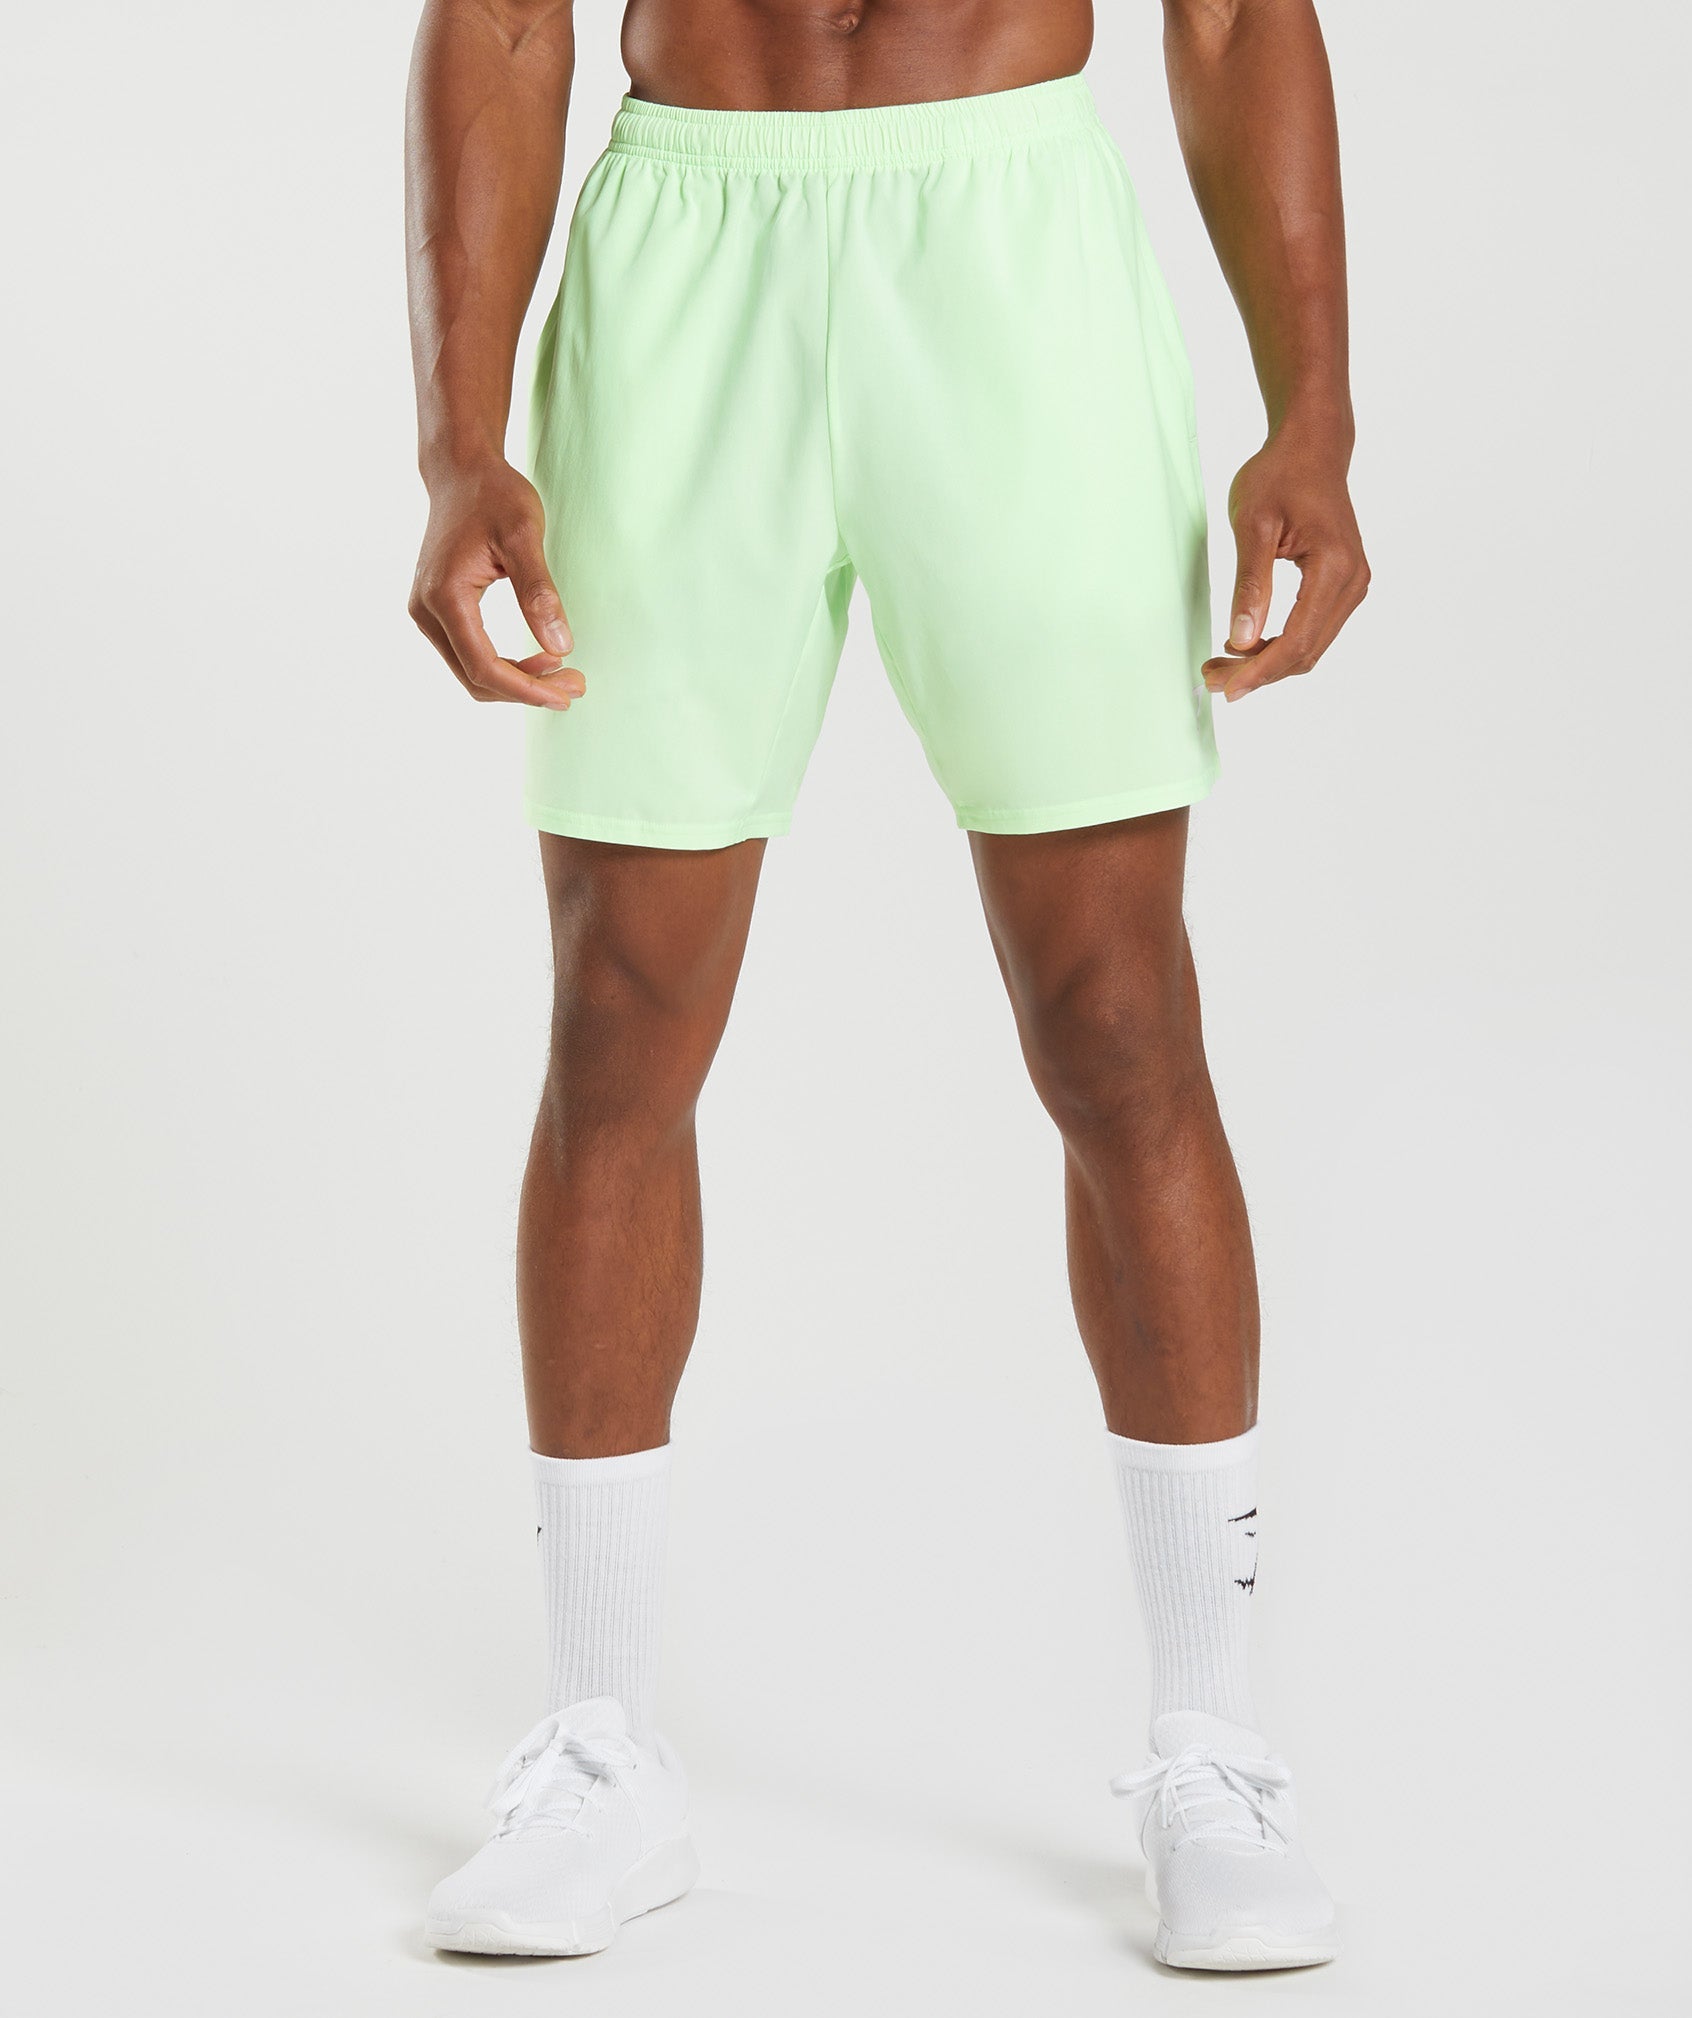 Arrival 7" Shorts in Fluo Mint - view 1